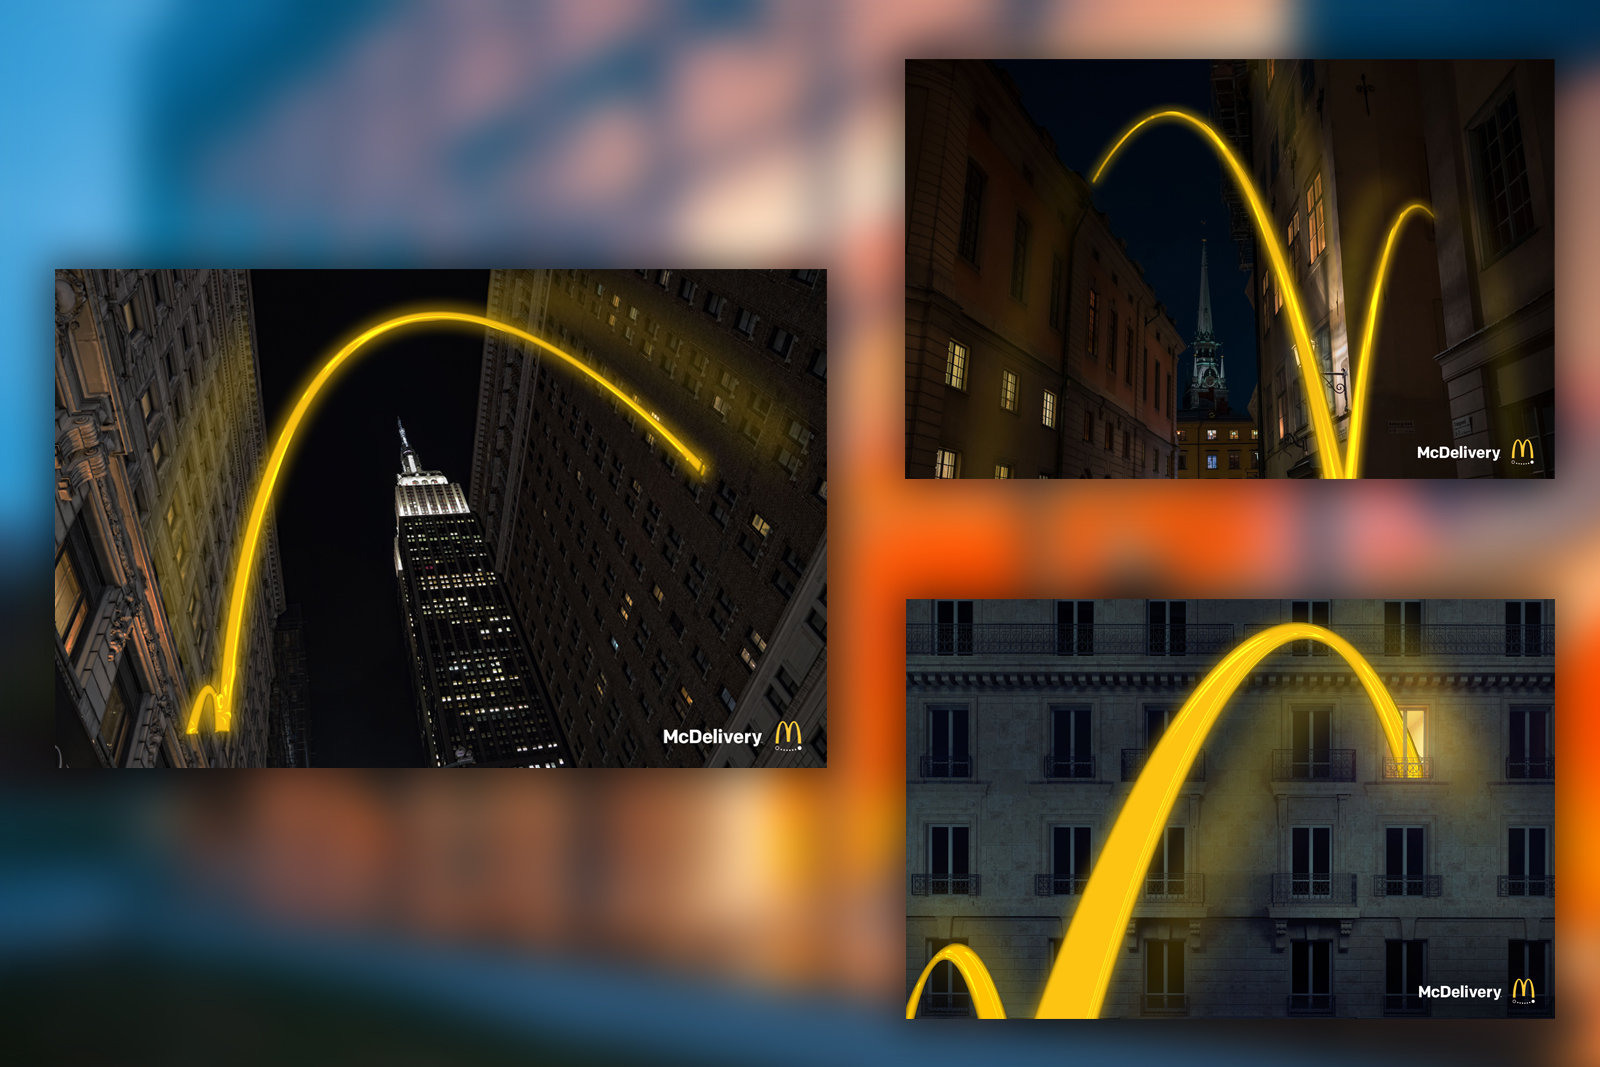 A series of images where the arc of the McDonald's logo looks like it's zooming across a city.